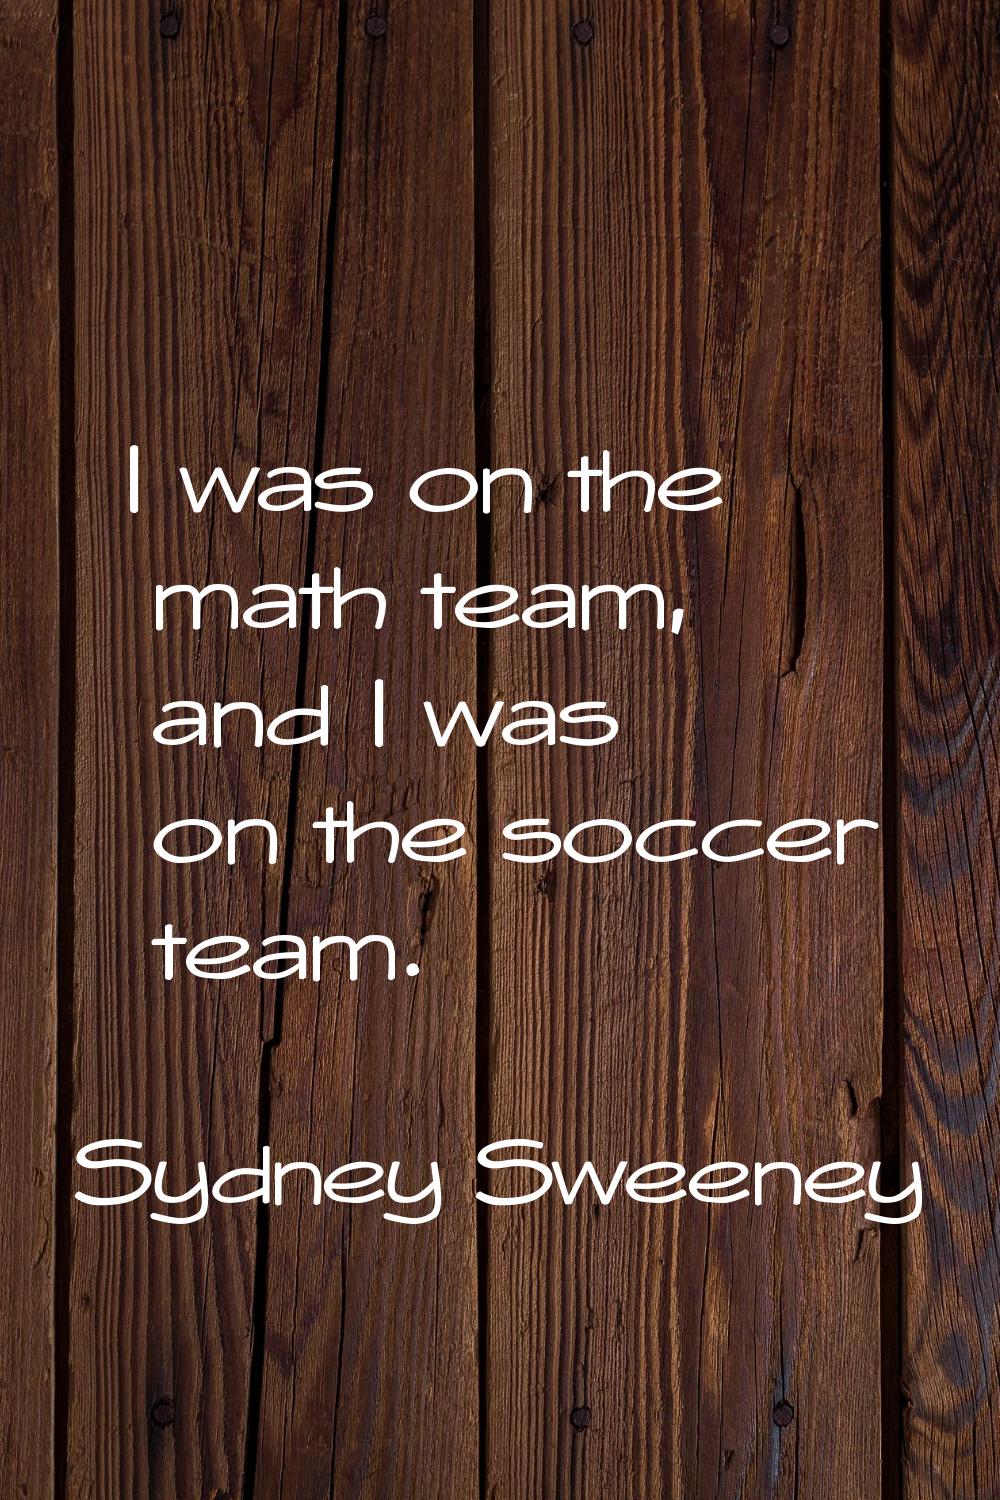 I was on the math team, and I was on the soccer team.